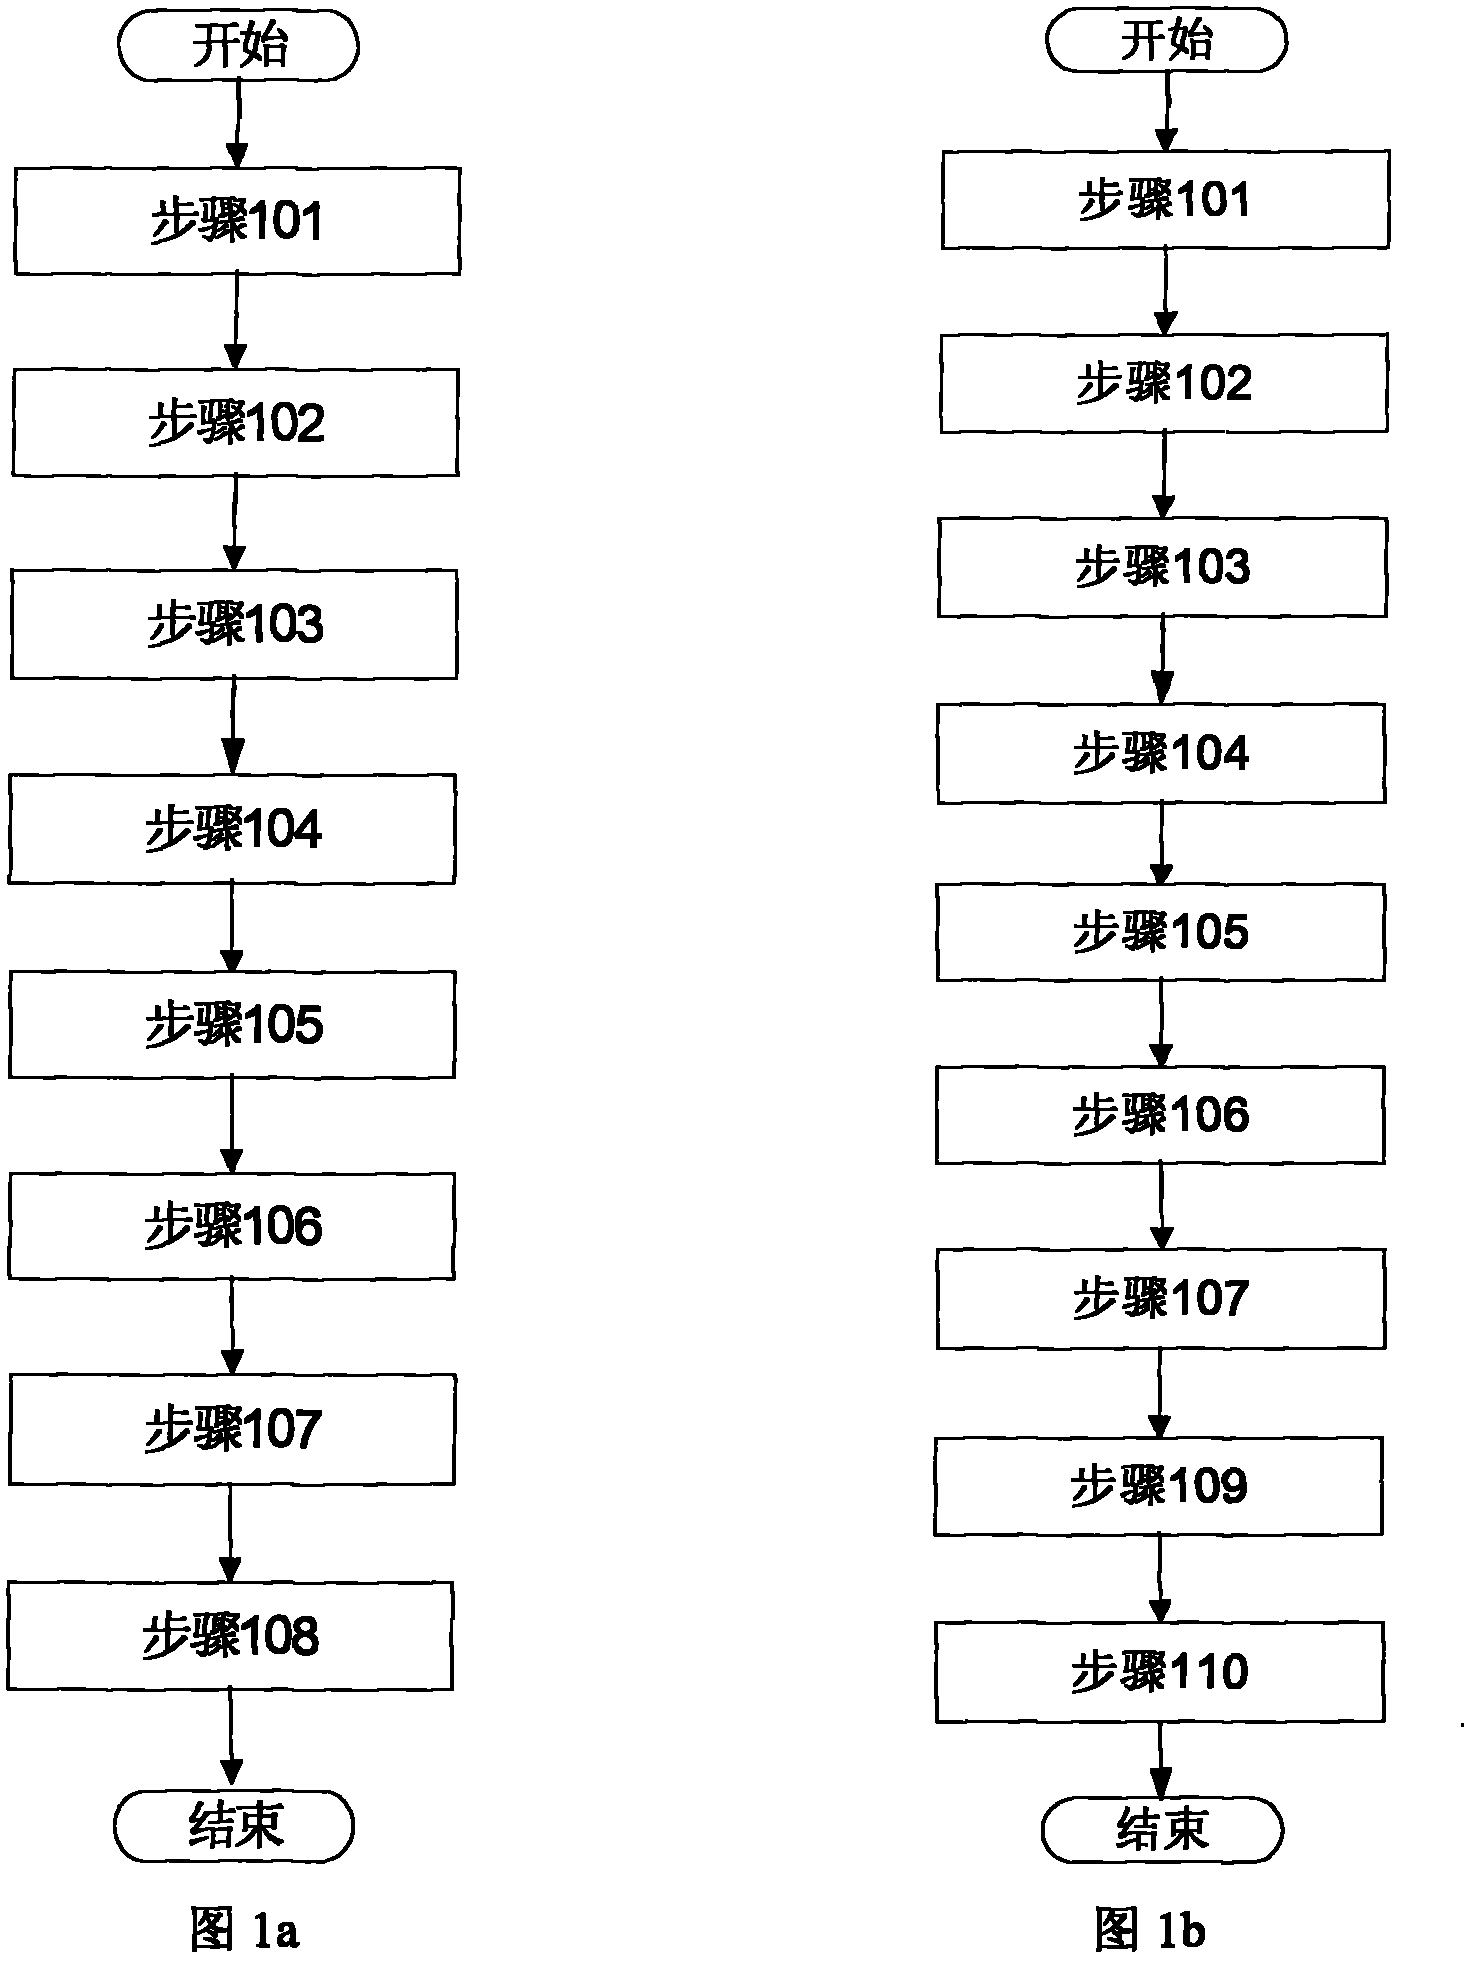 Method and device for optimizing scanning flow